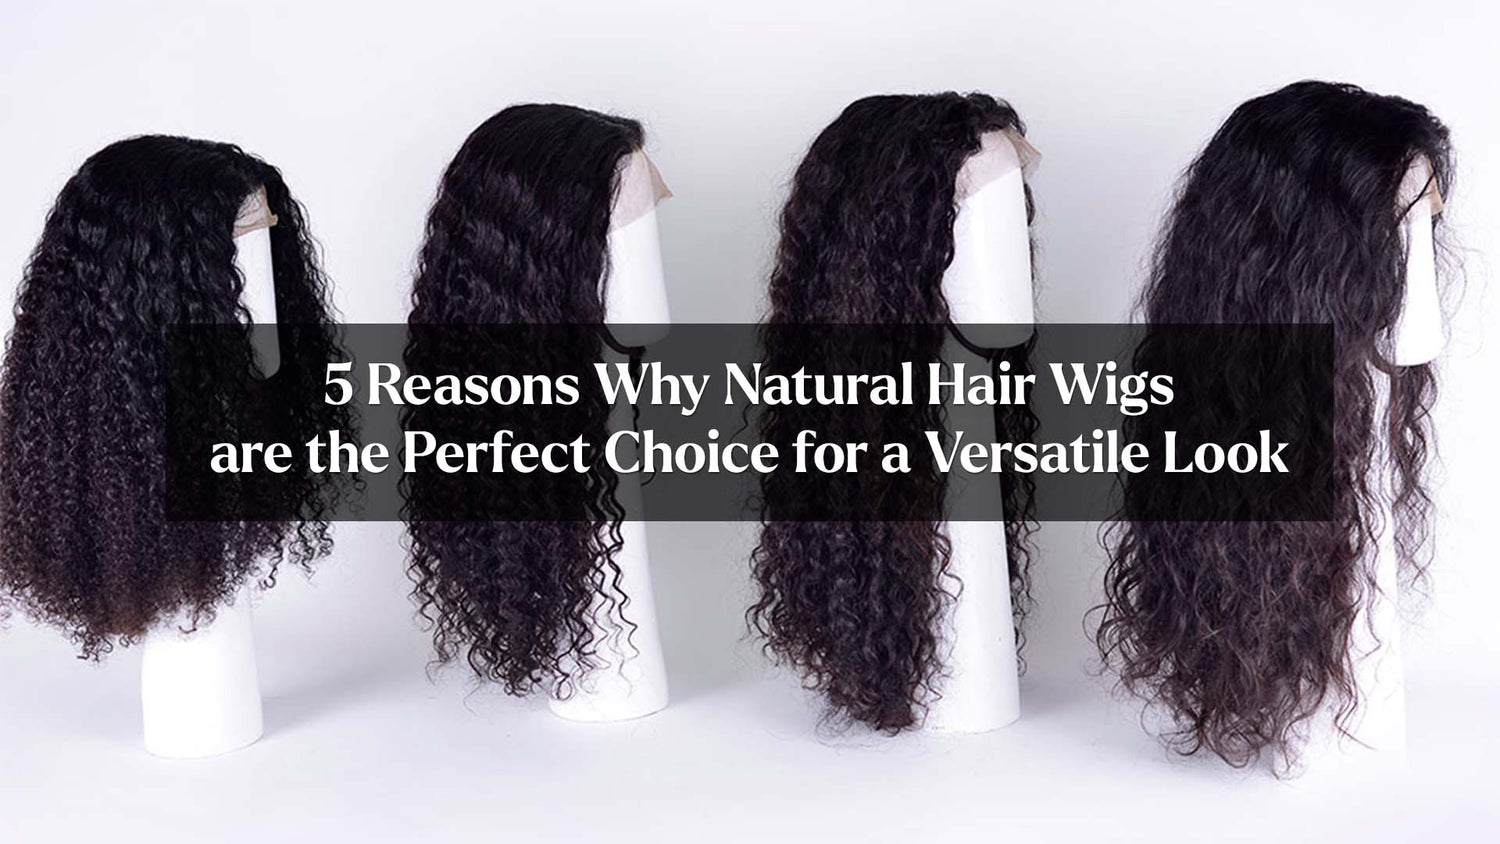 5 Reasons Why Natural Hair Wigs are the Perfect Choice for a Versatile Look